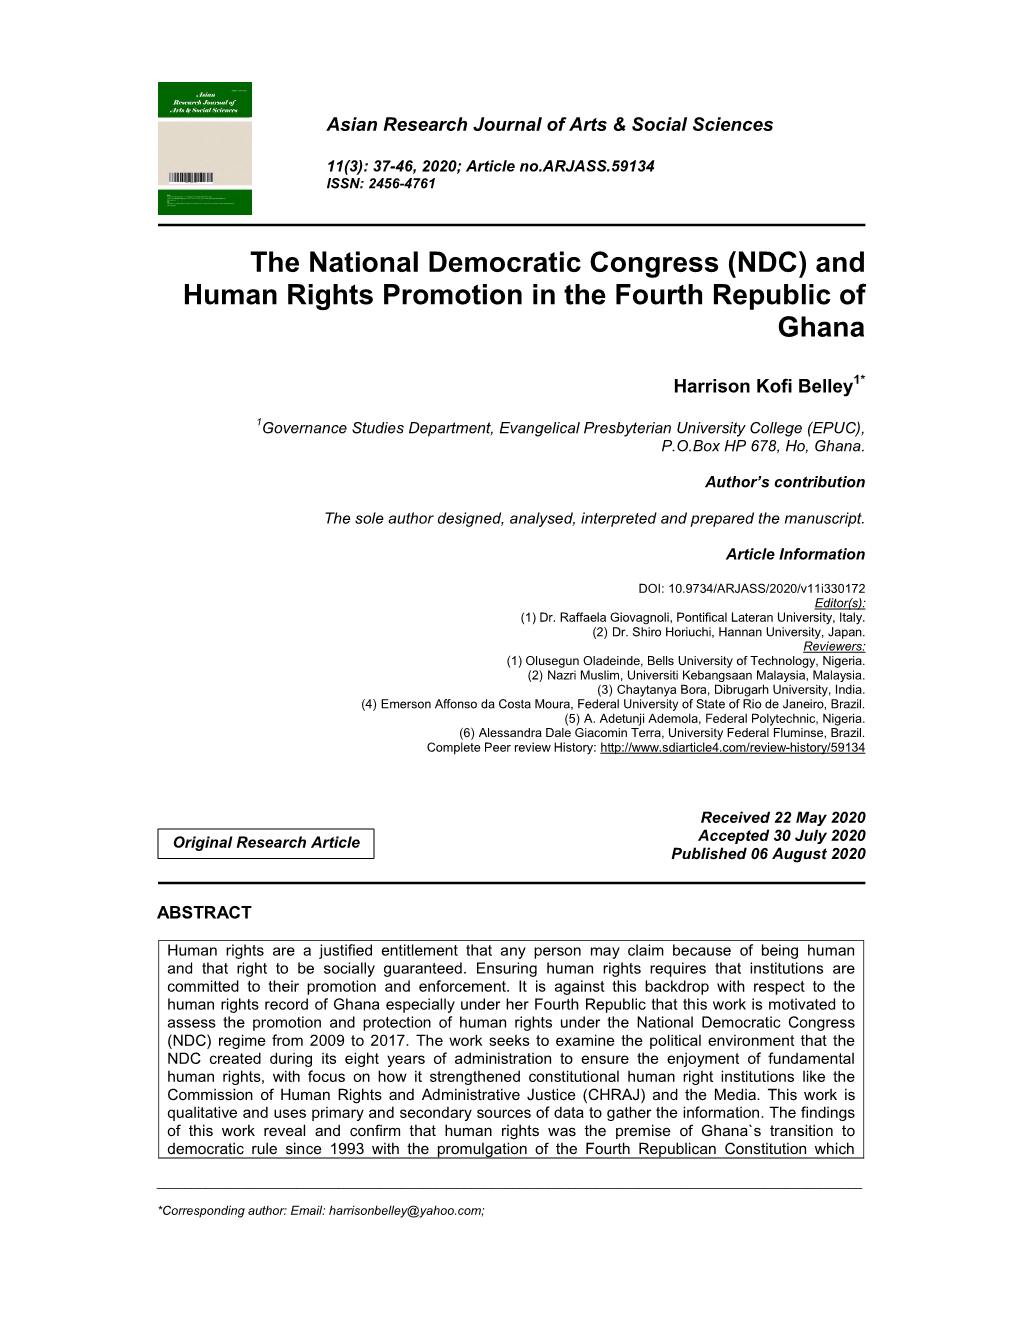 (NDC) and Human Rights Promotion in the Fourth Republic of Ghana